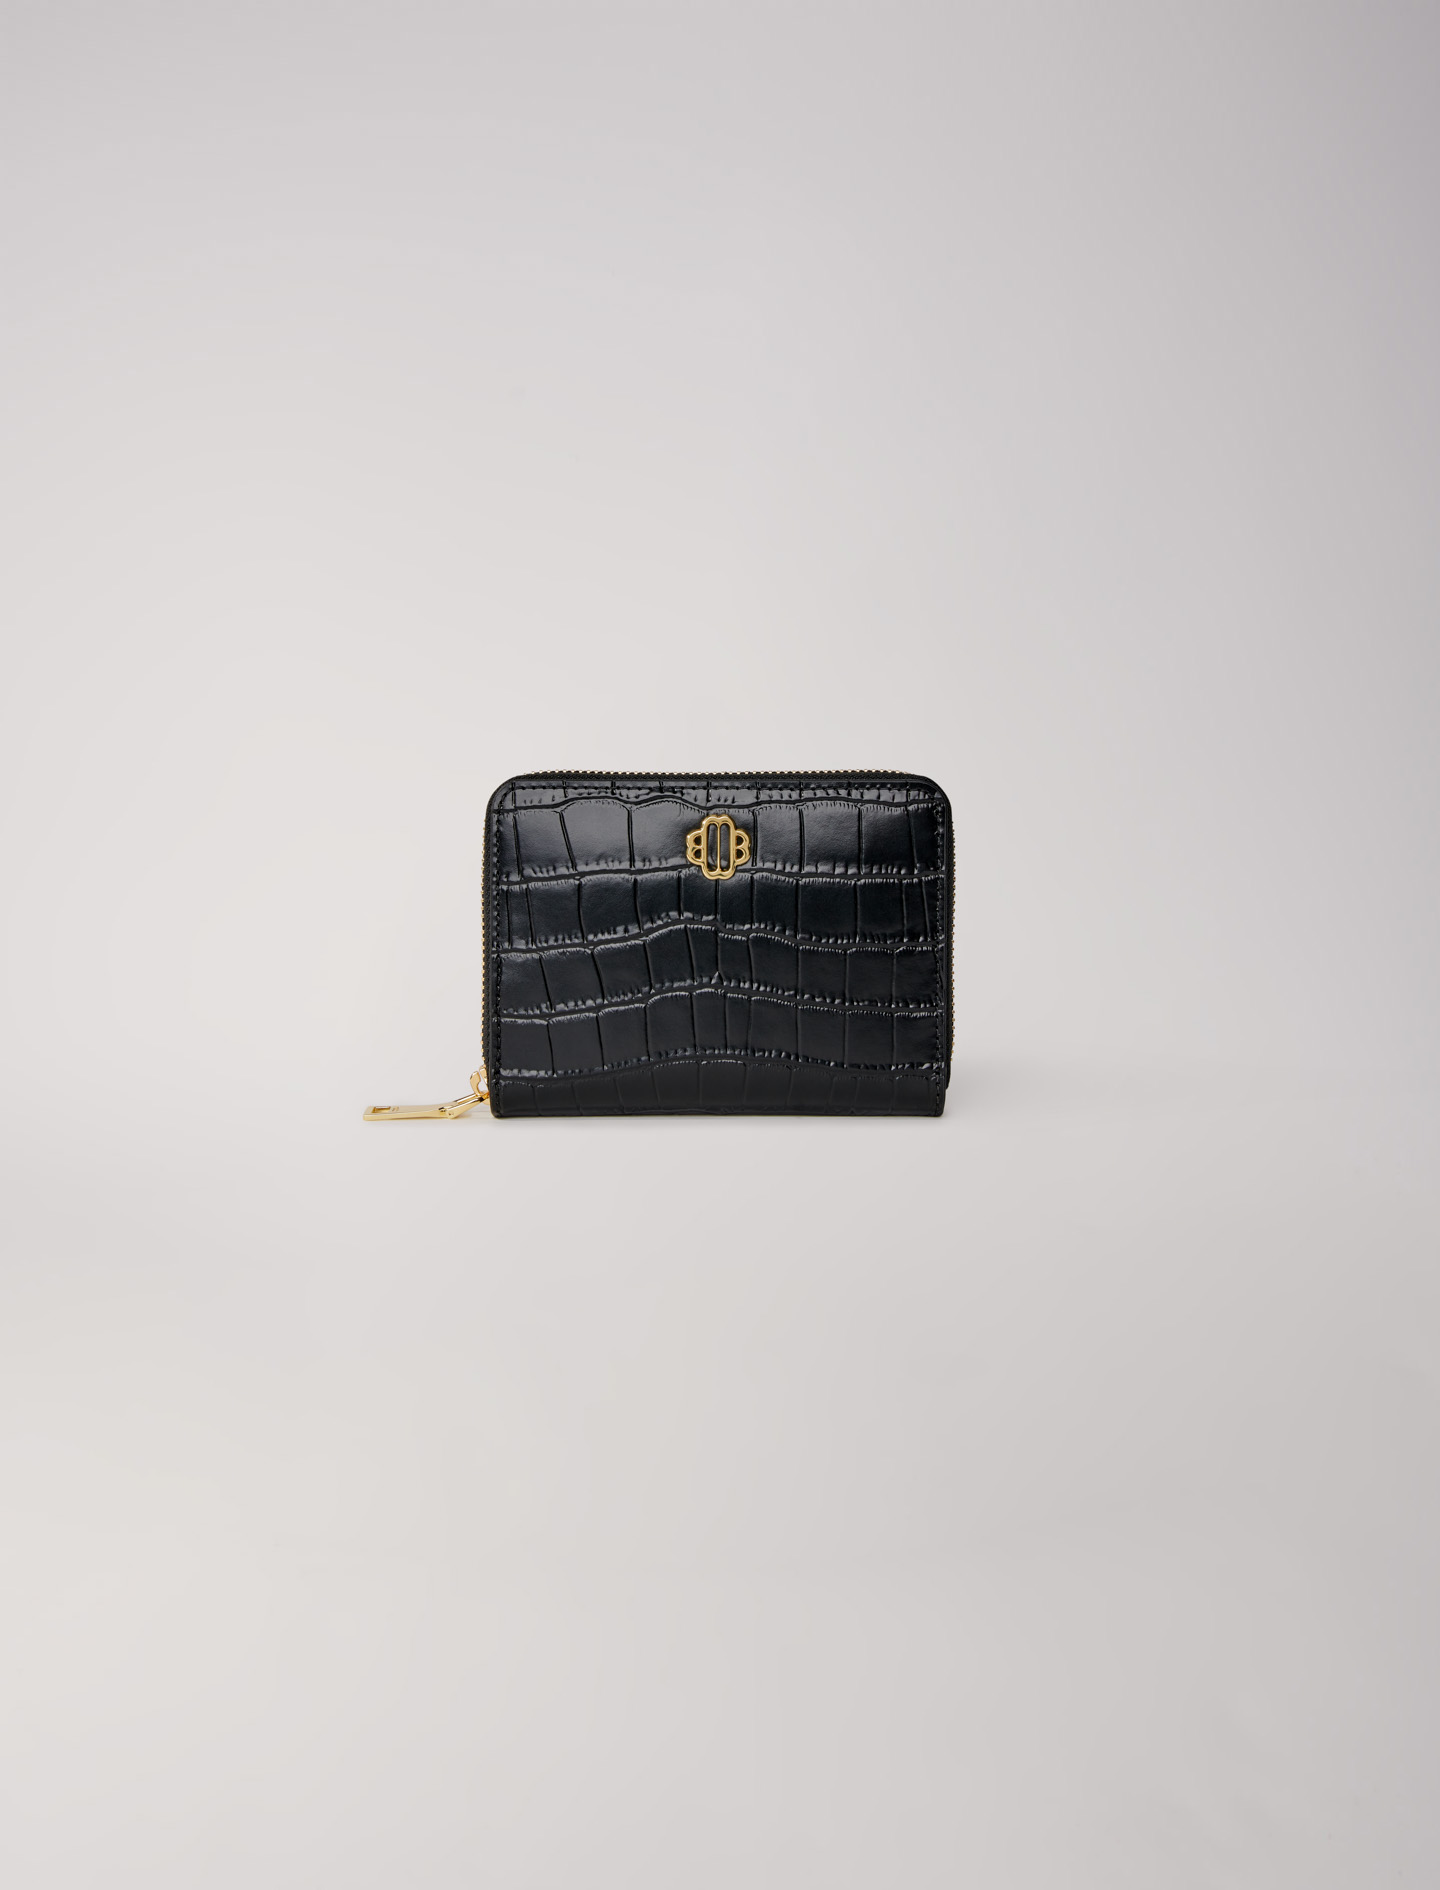 Maje Woman's polyurethane Pocket lining: LEATHER WALLET for Fall/Winter, in color Black / Black